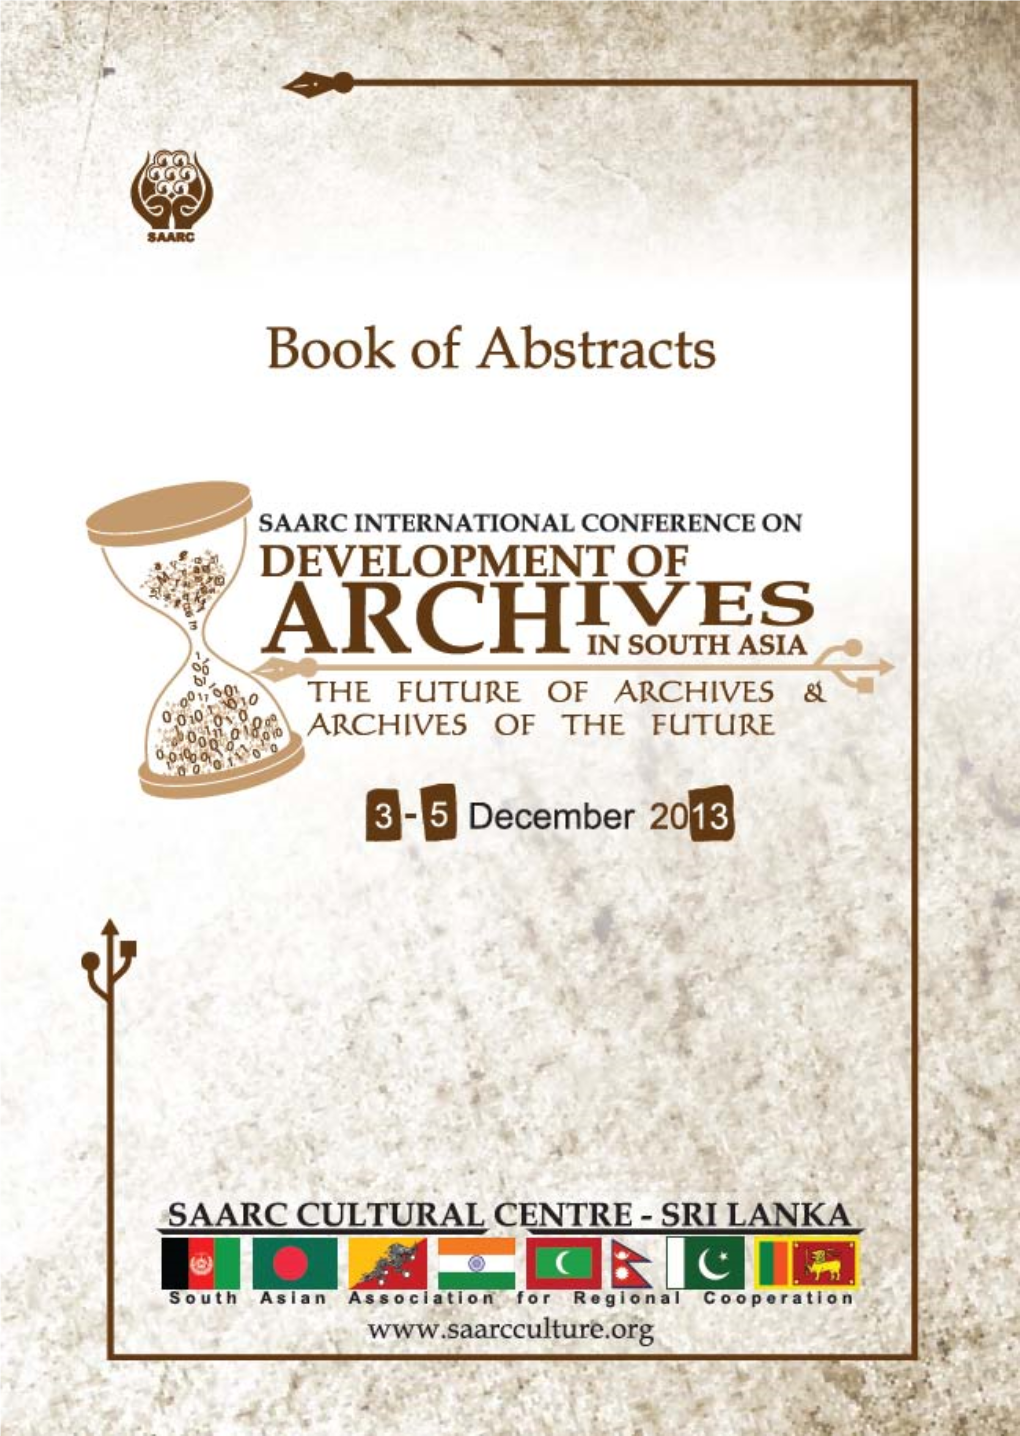 Development of Archives in South Asia: ‘The Future of Archives & Archives of the Future’